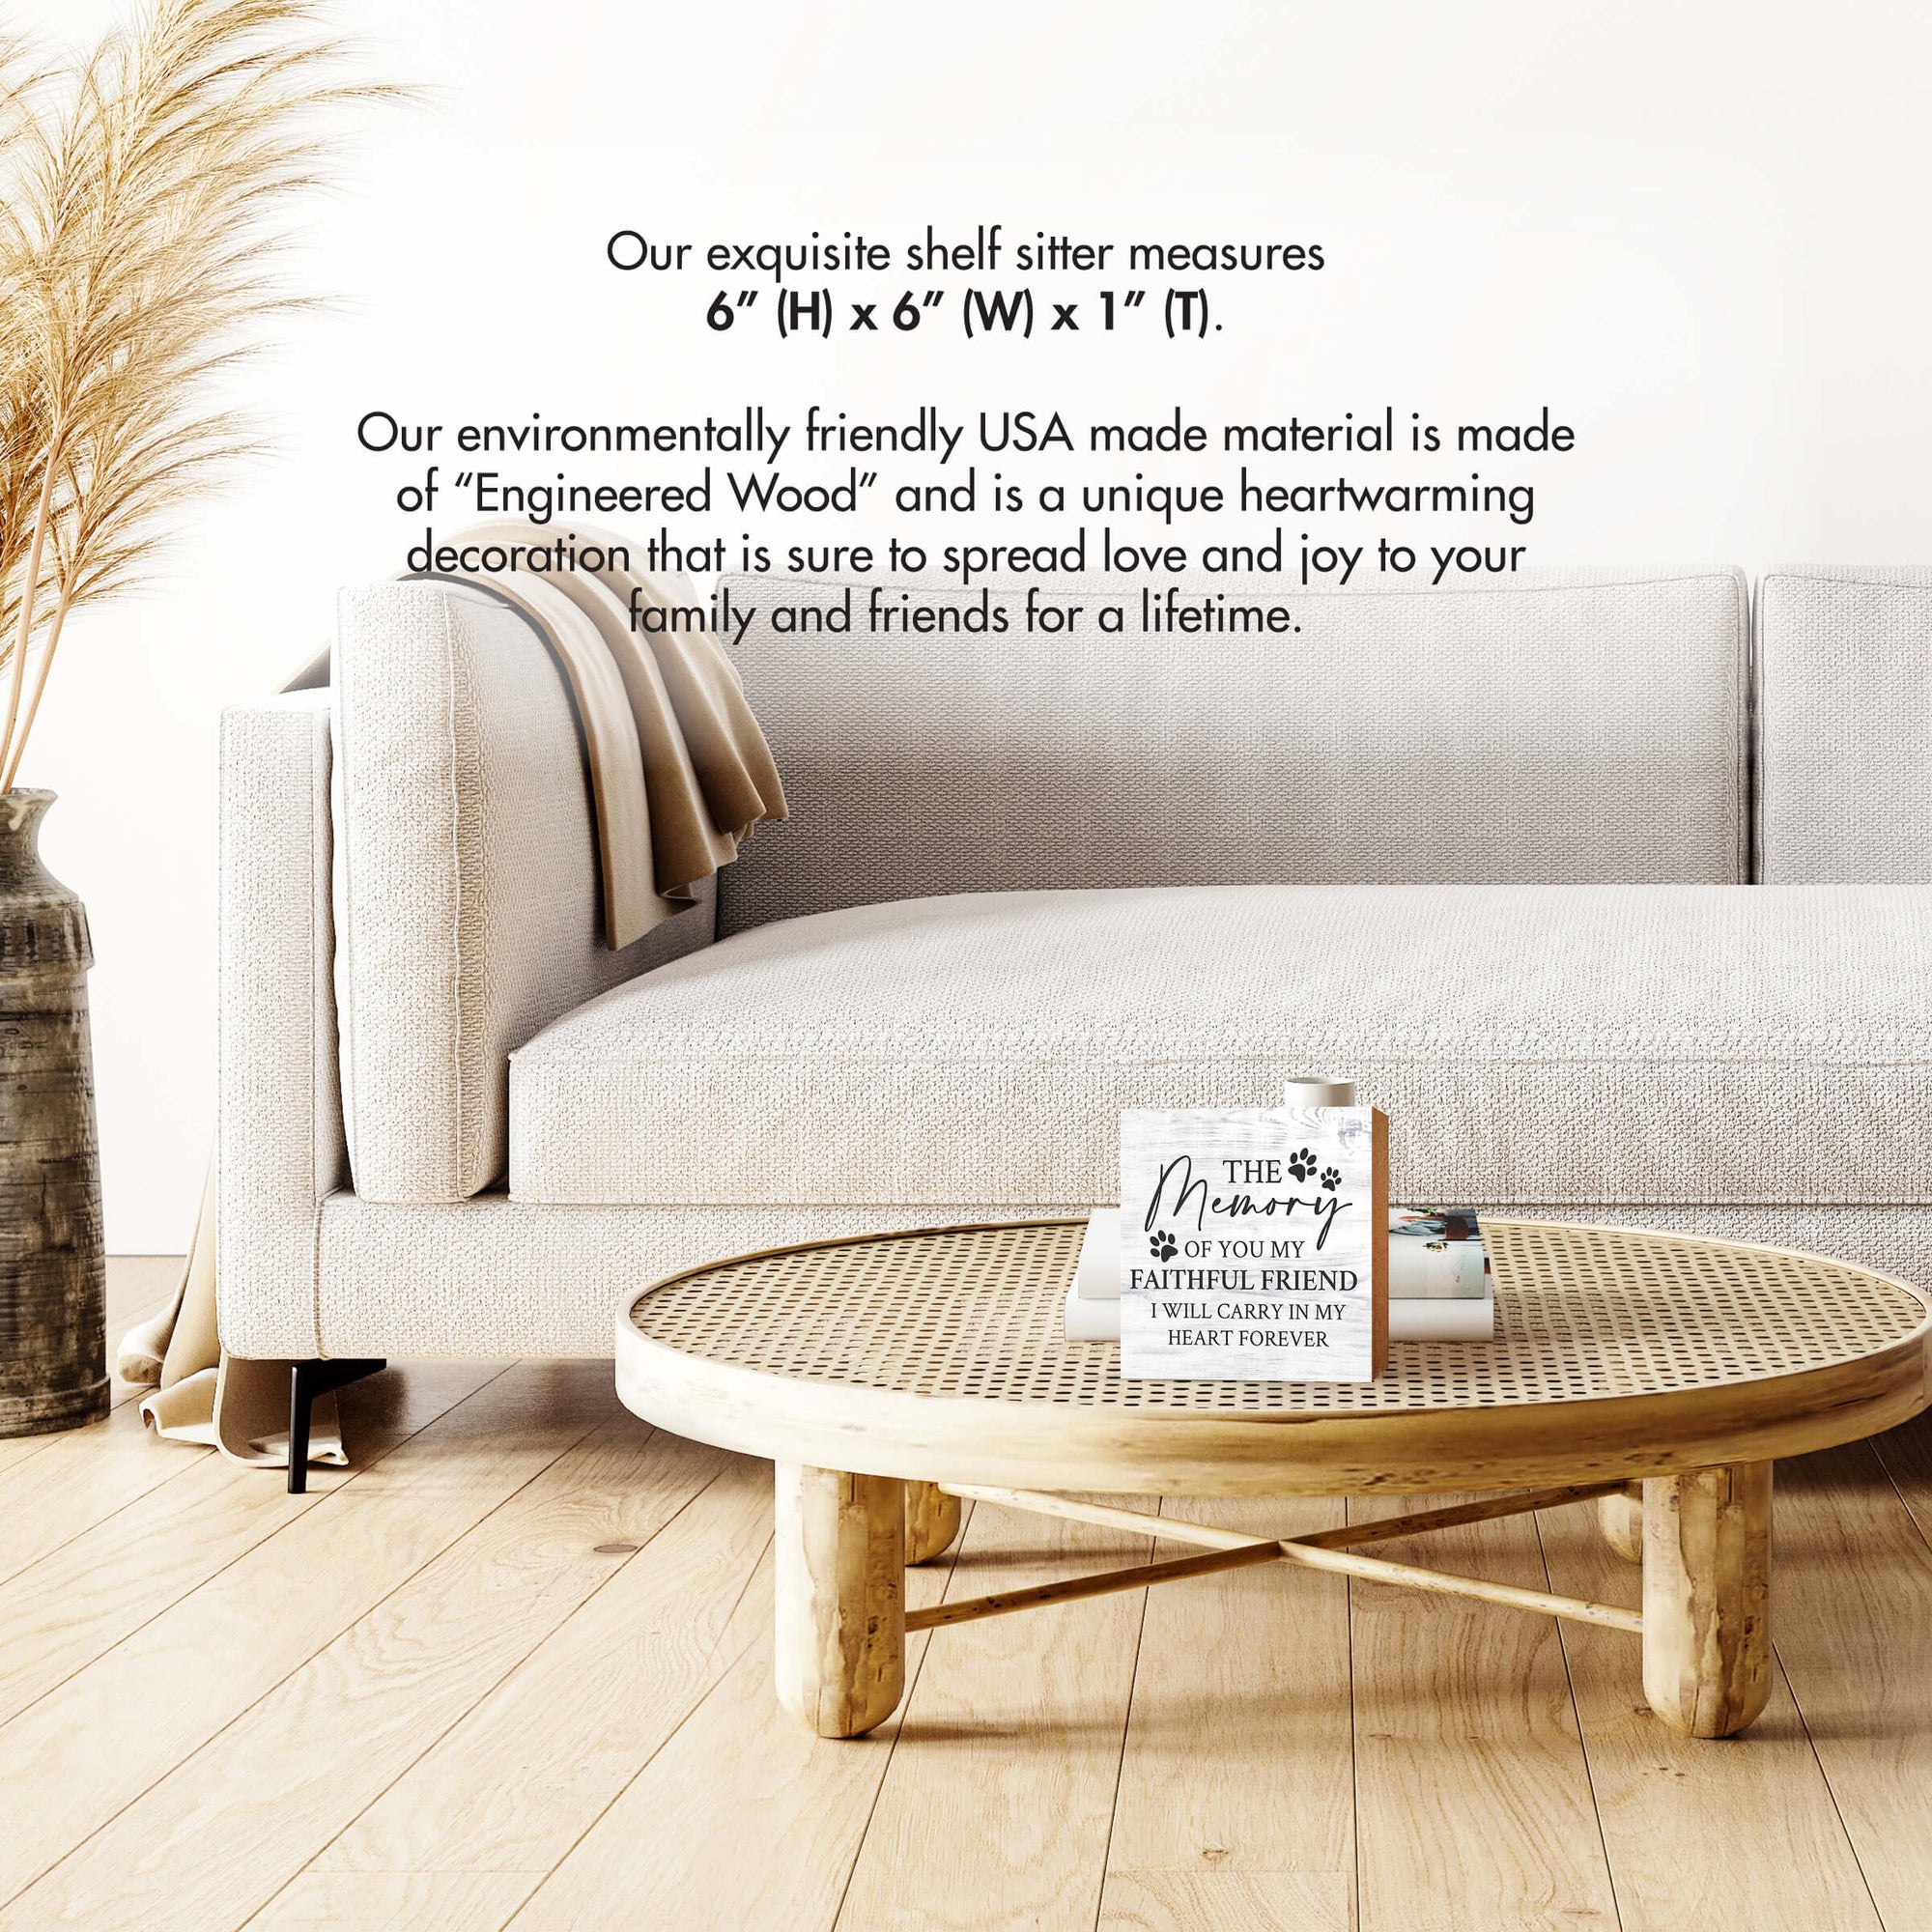 Wooden Shelf Decor and Tabletop Signs with Pet Verses - The Memory Of You